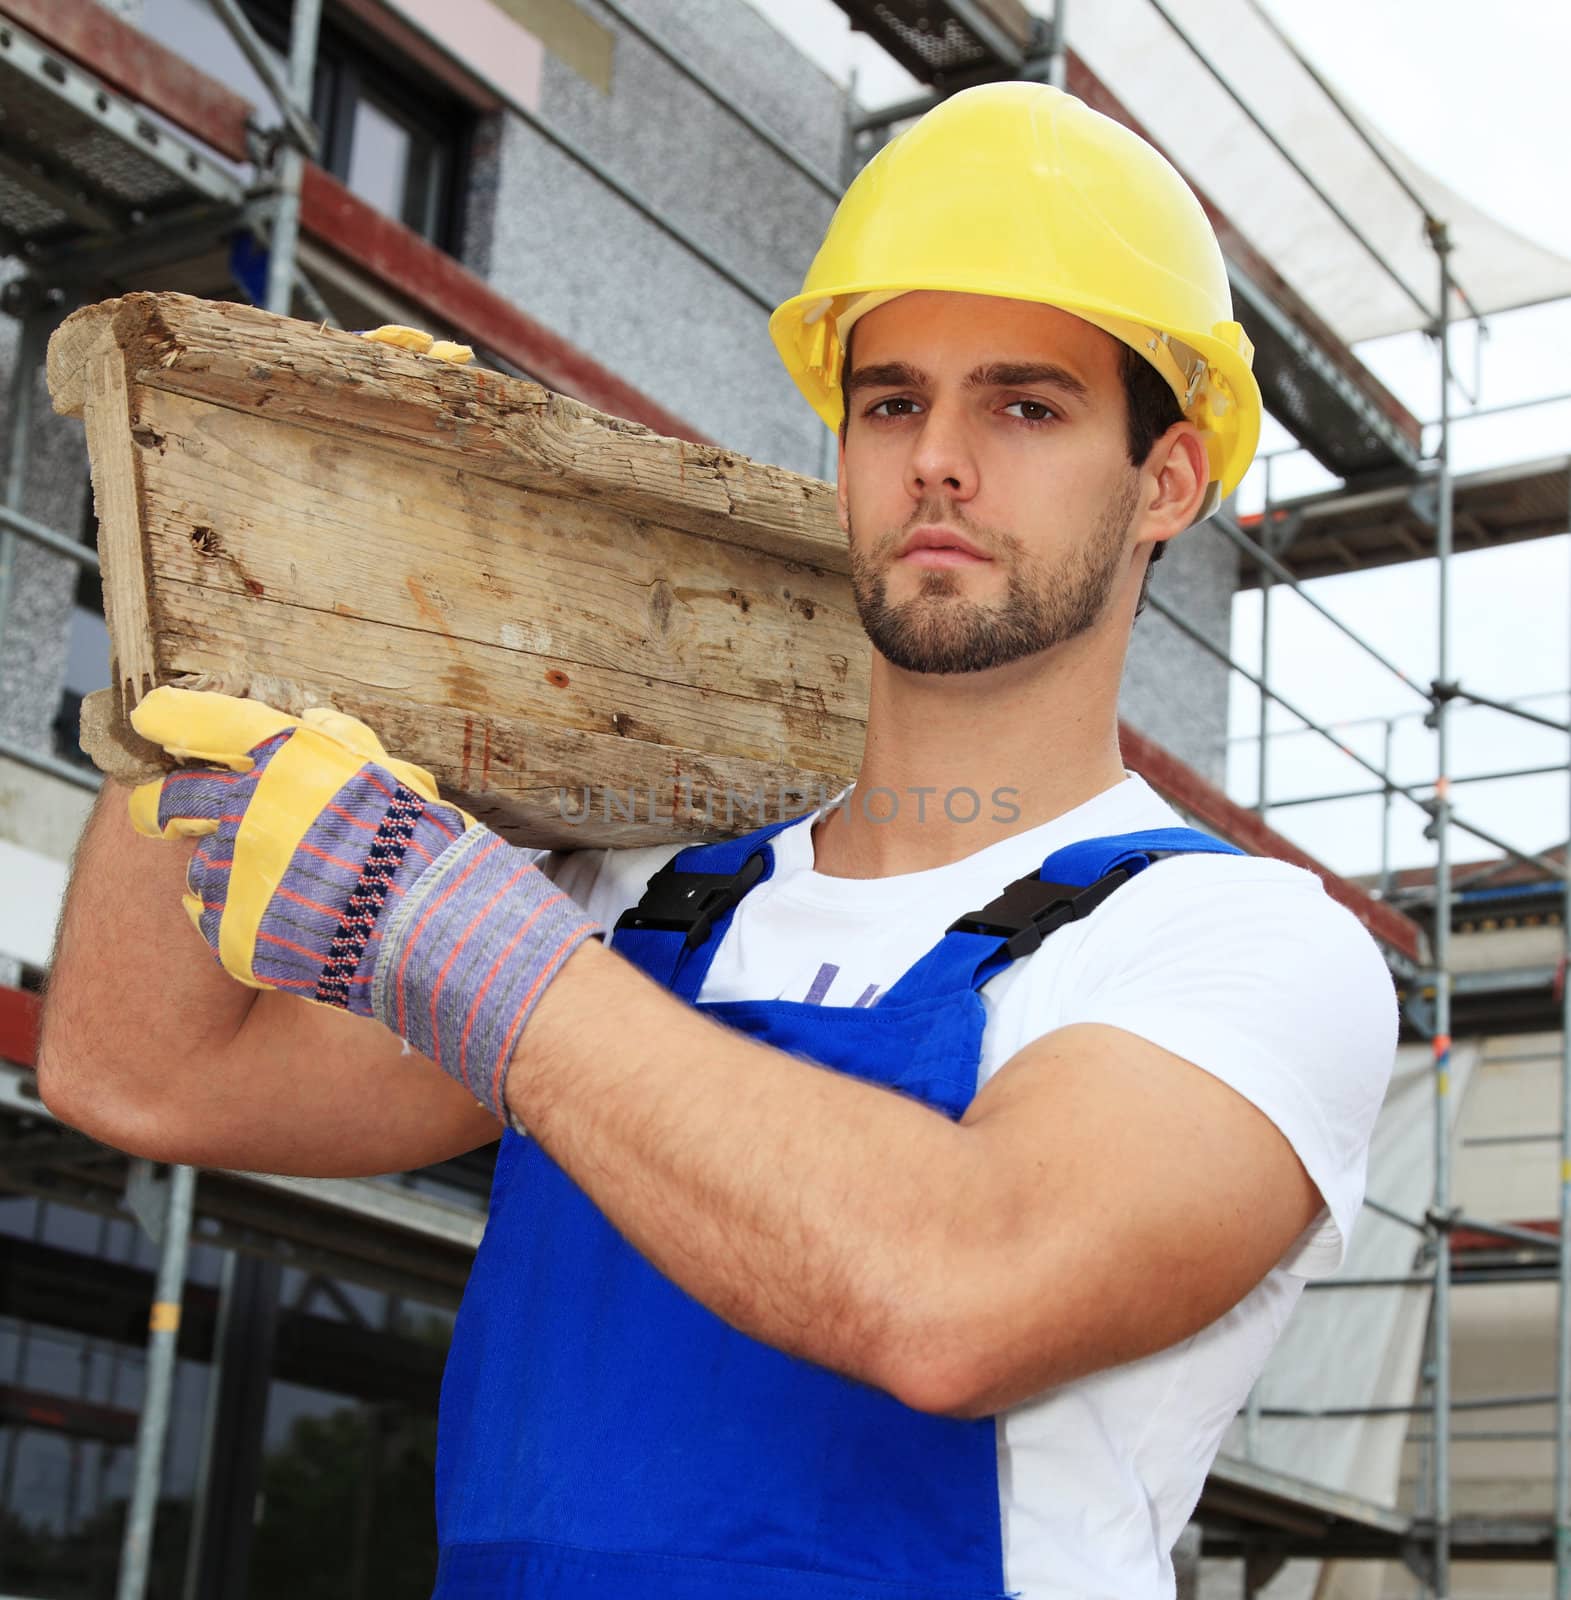 Manual worker on construction site carrying wooden board.